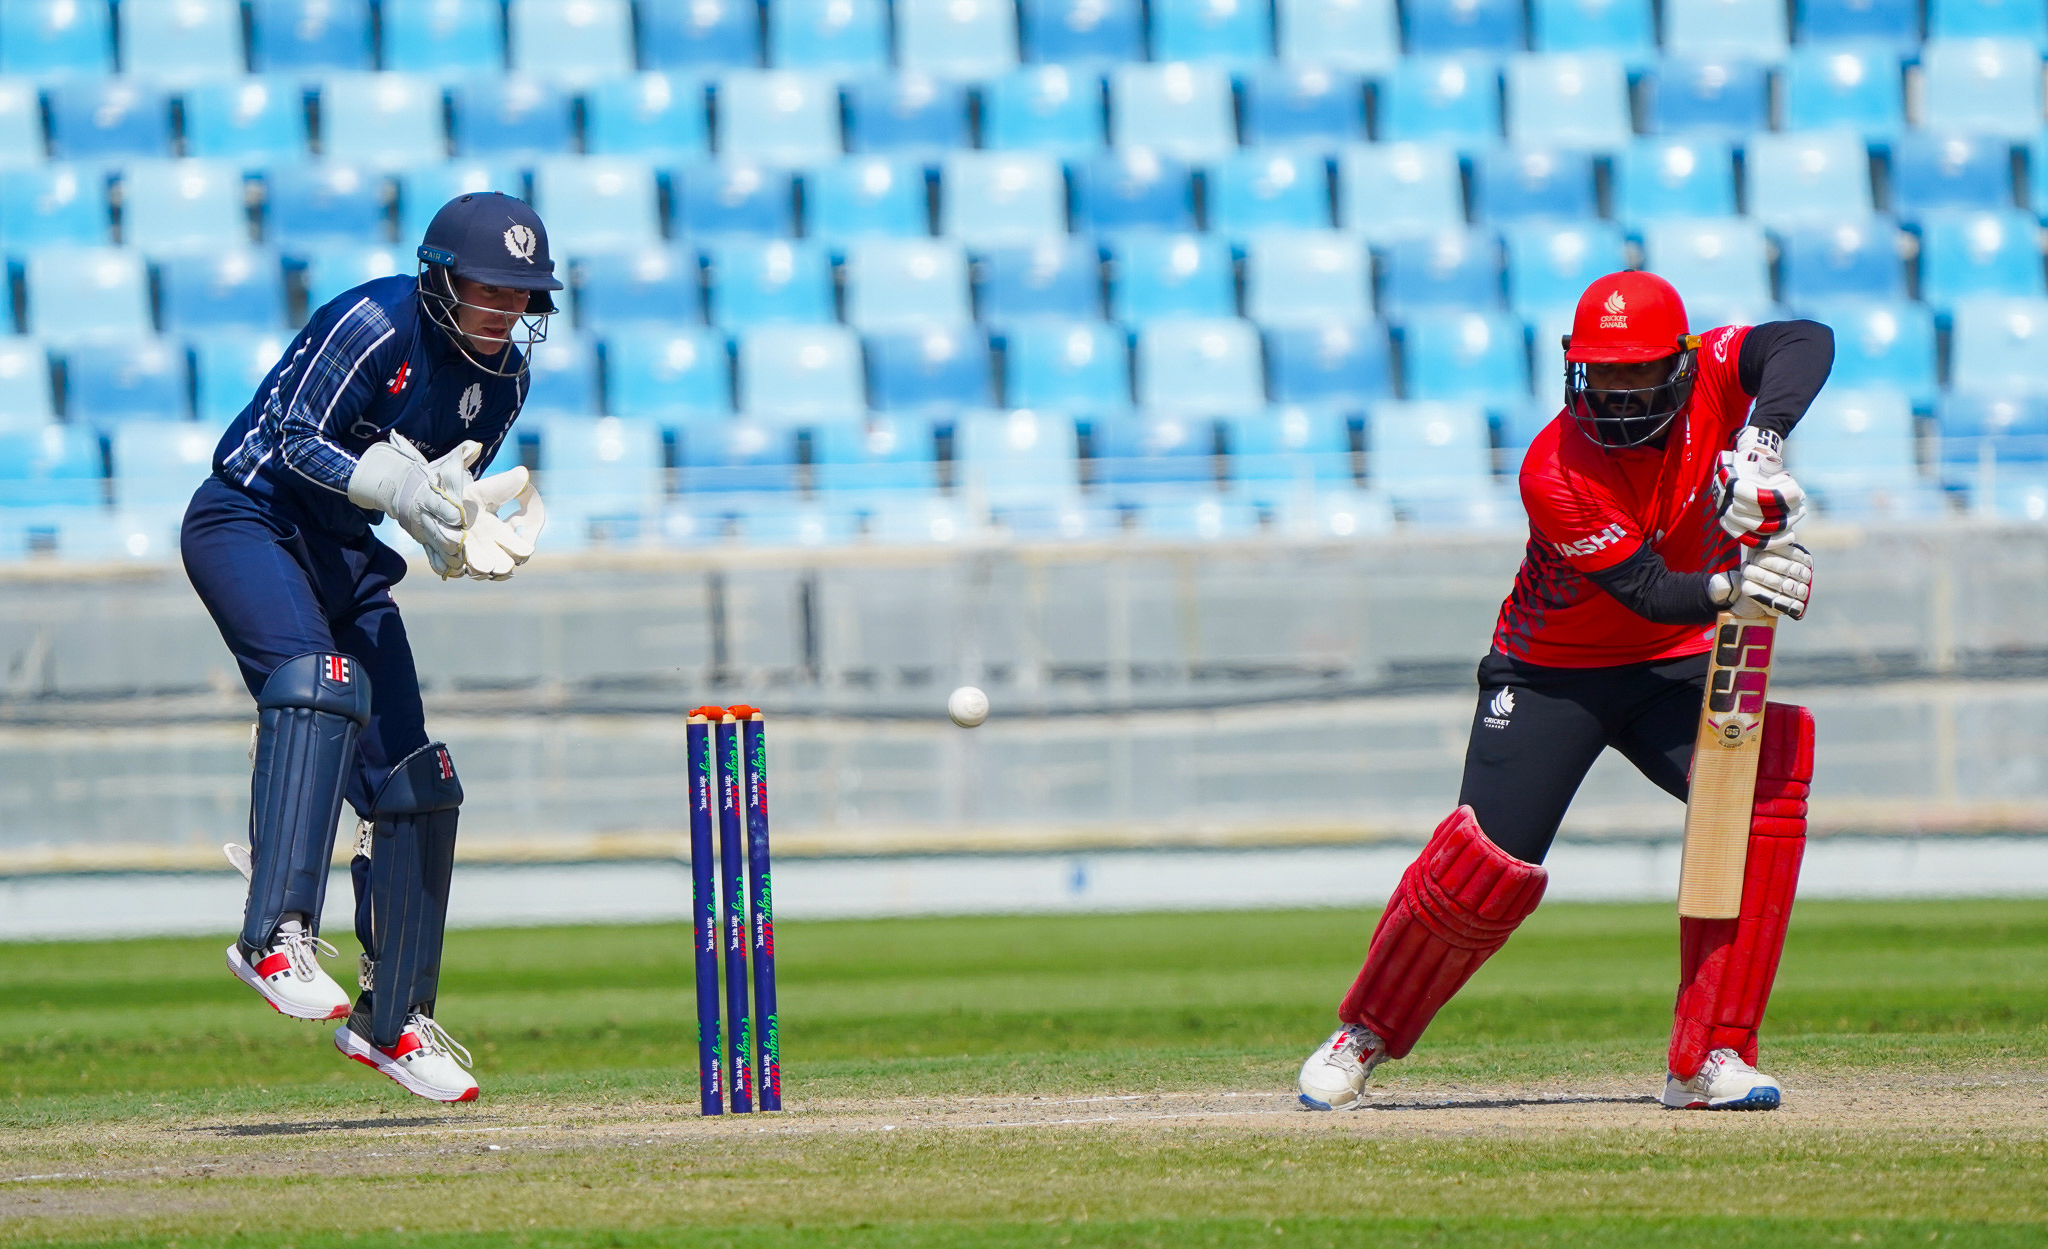 SCOTS FALL TO CWCL2 DEFEAT AGAINST CANADA